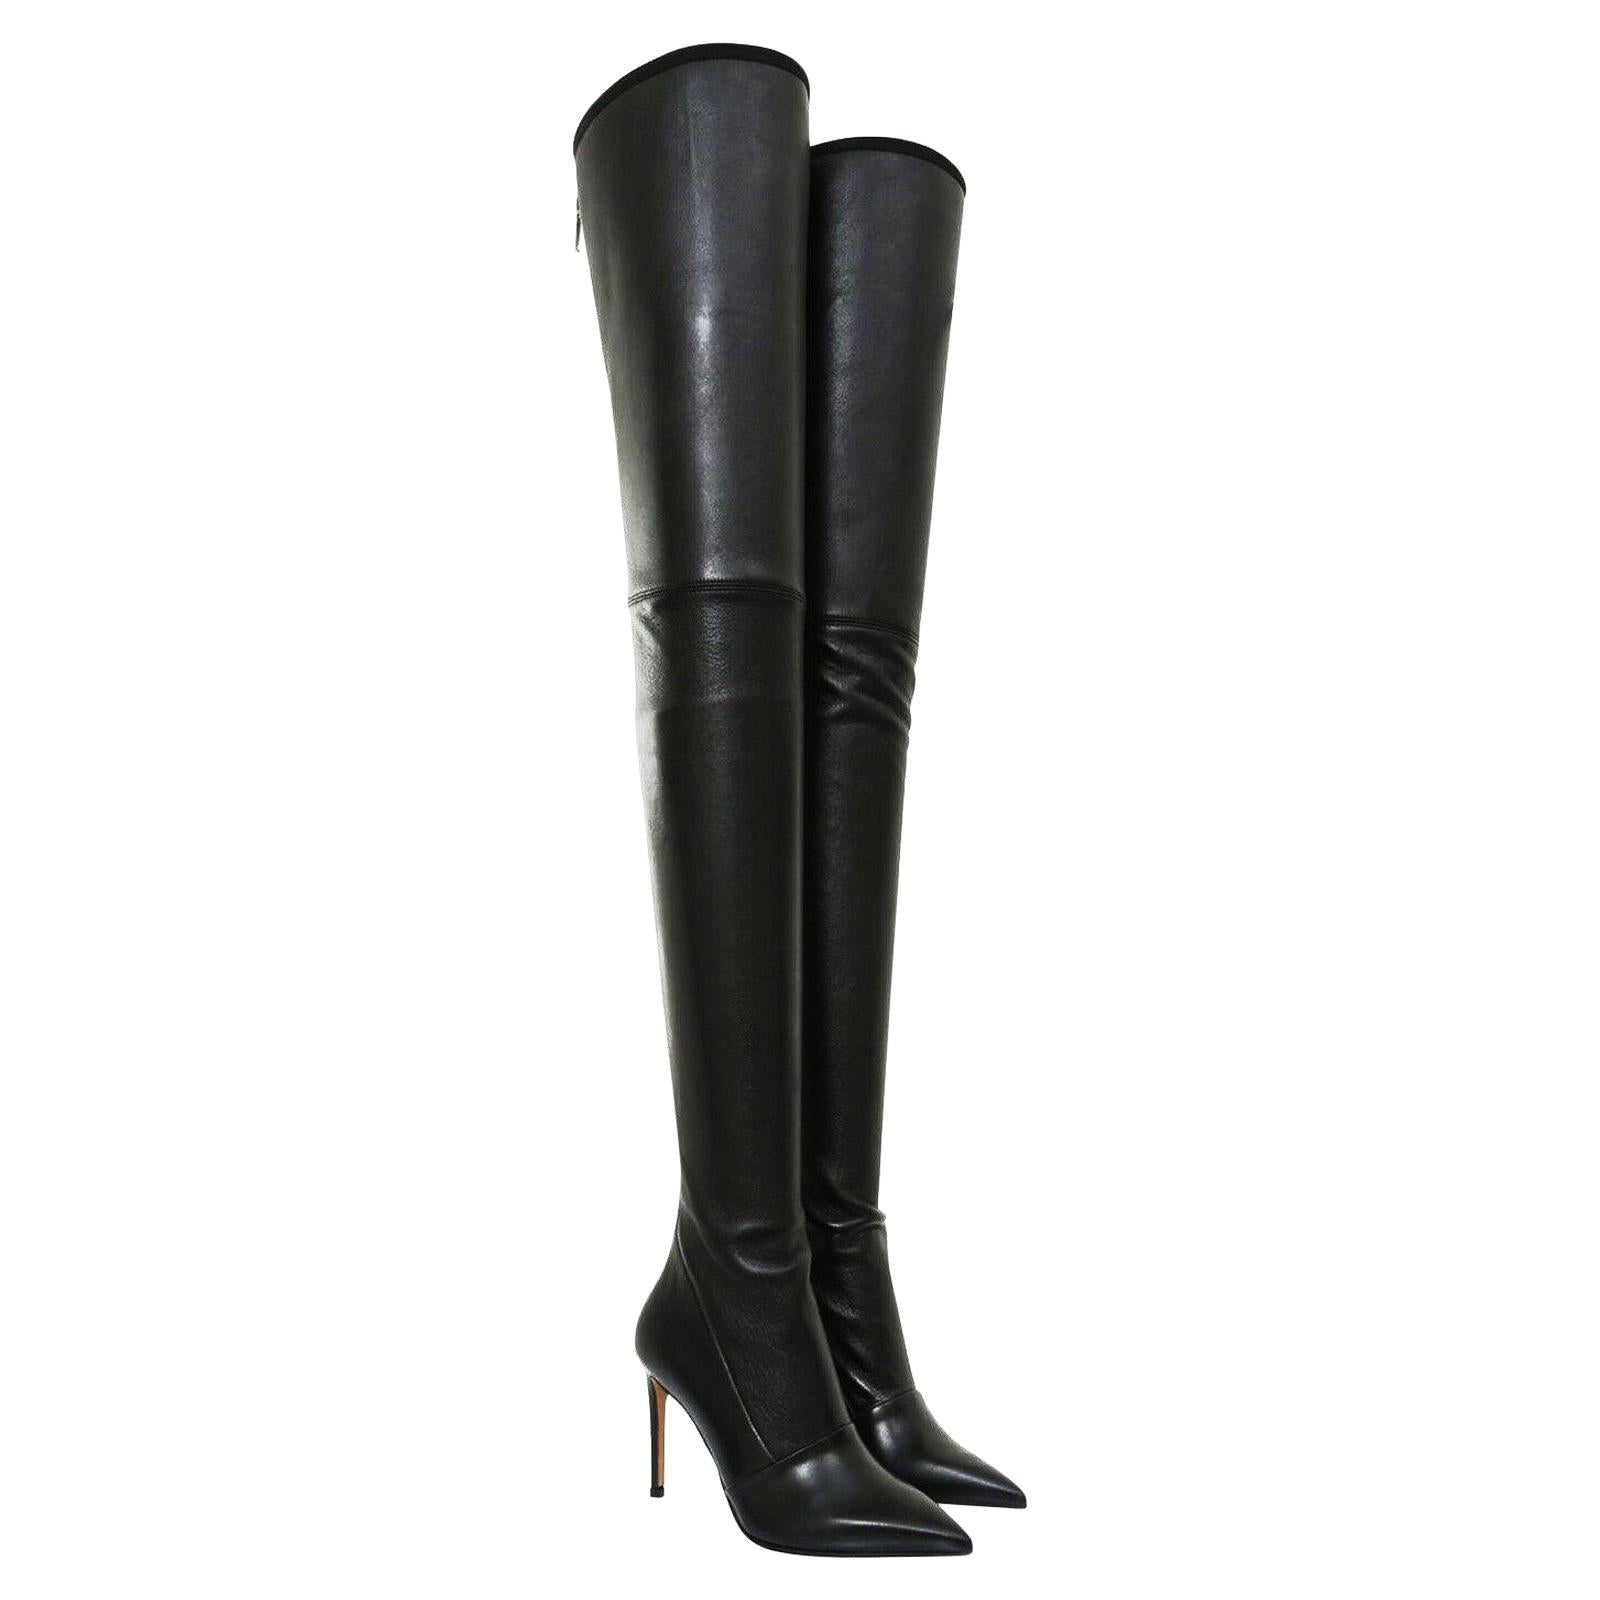 New Balmain Black Stretch Leather Thigh High Stiletto Heel Boots 36 37 37.5 38  For Sale